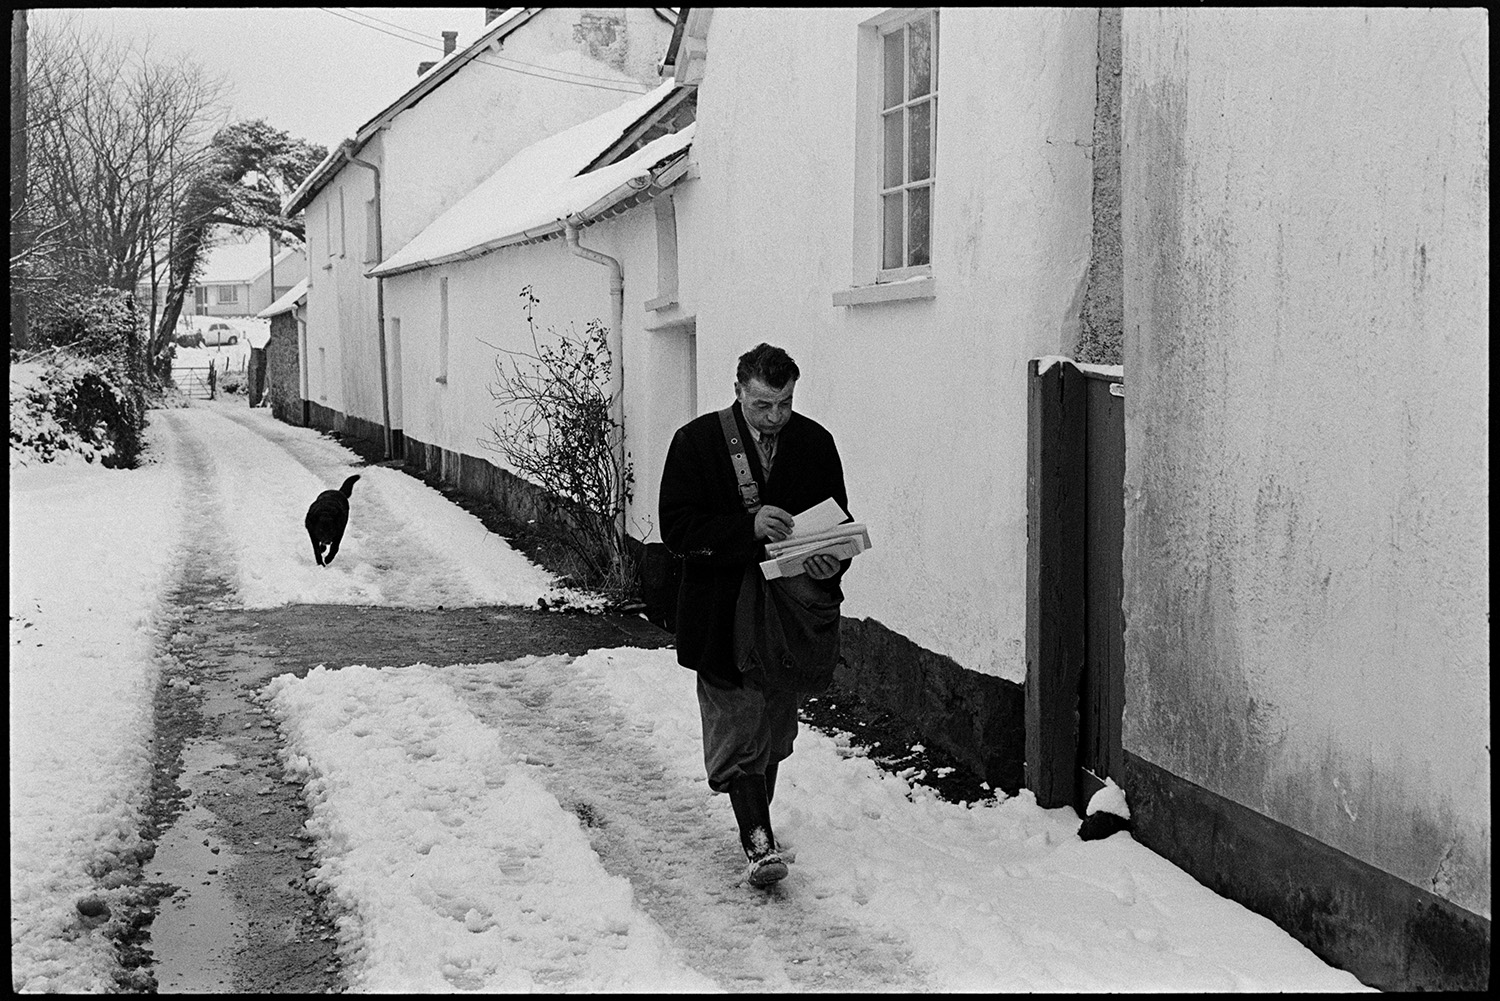 Snow, Street scenes postman and dog, children throwing snowballs, people chatting. 
[Harold Nott, also known as Joe Bec, a postman, walking along a snowy street in Dolton. He is accompanied by a dog and is carrying a handful of letters to deliver.]